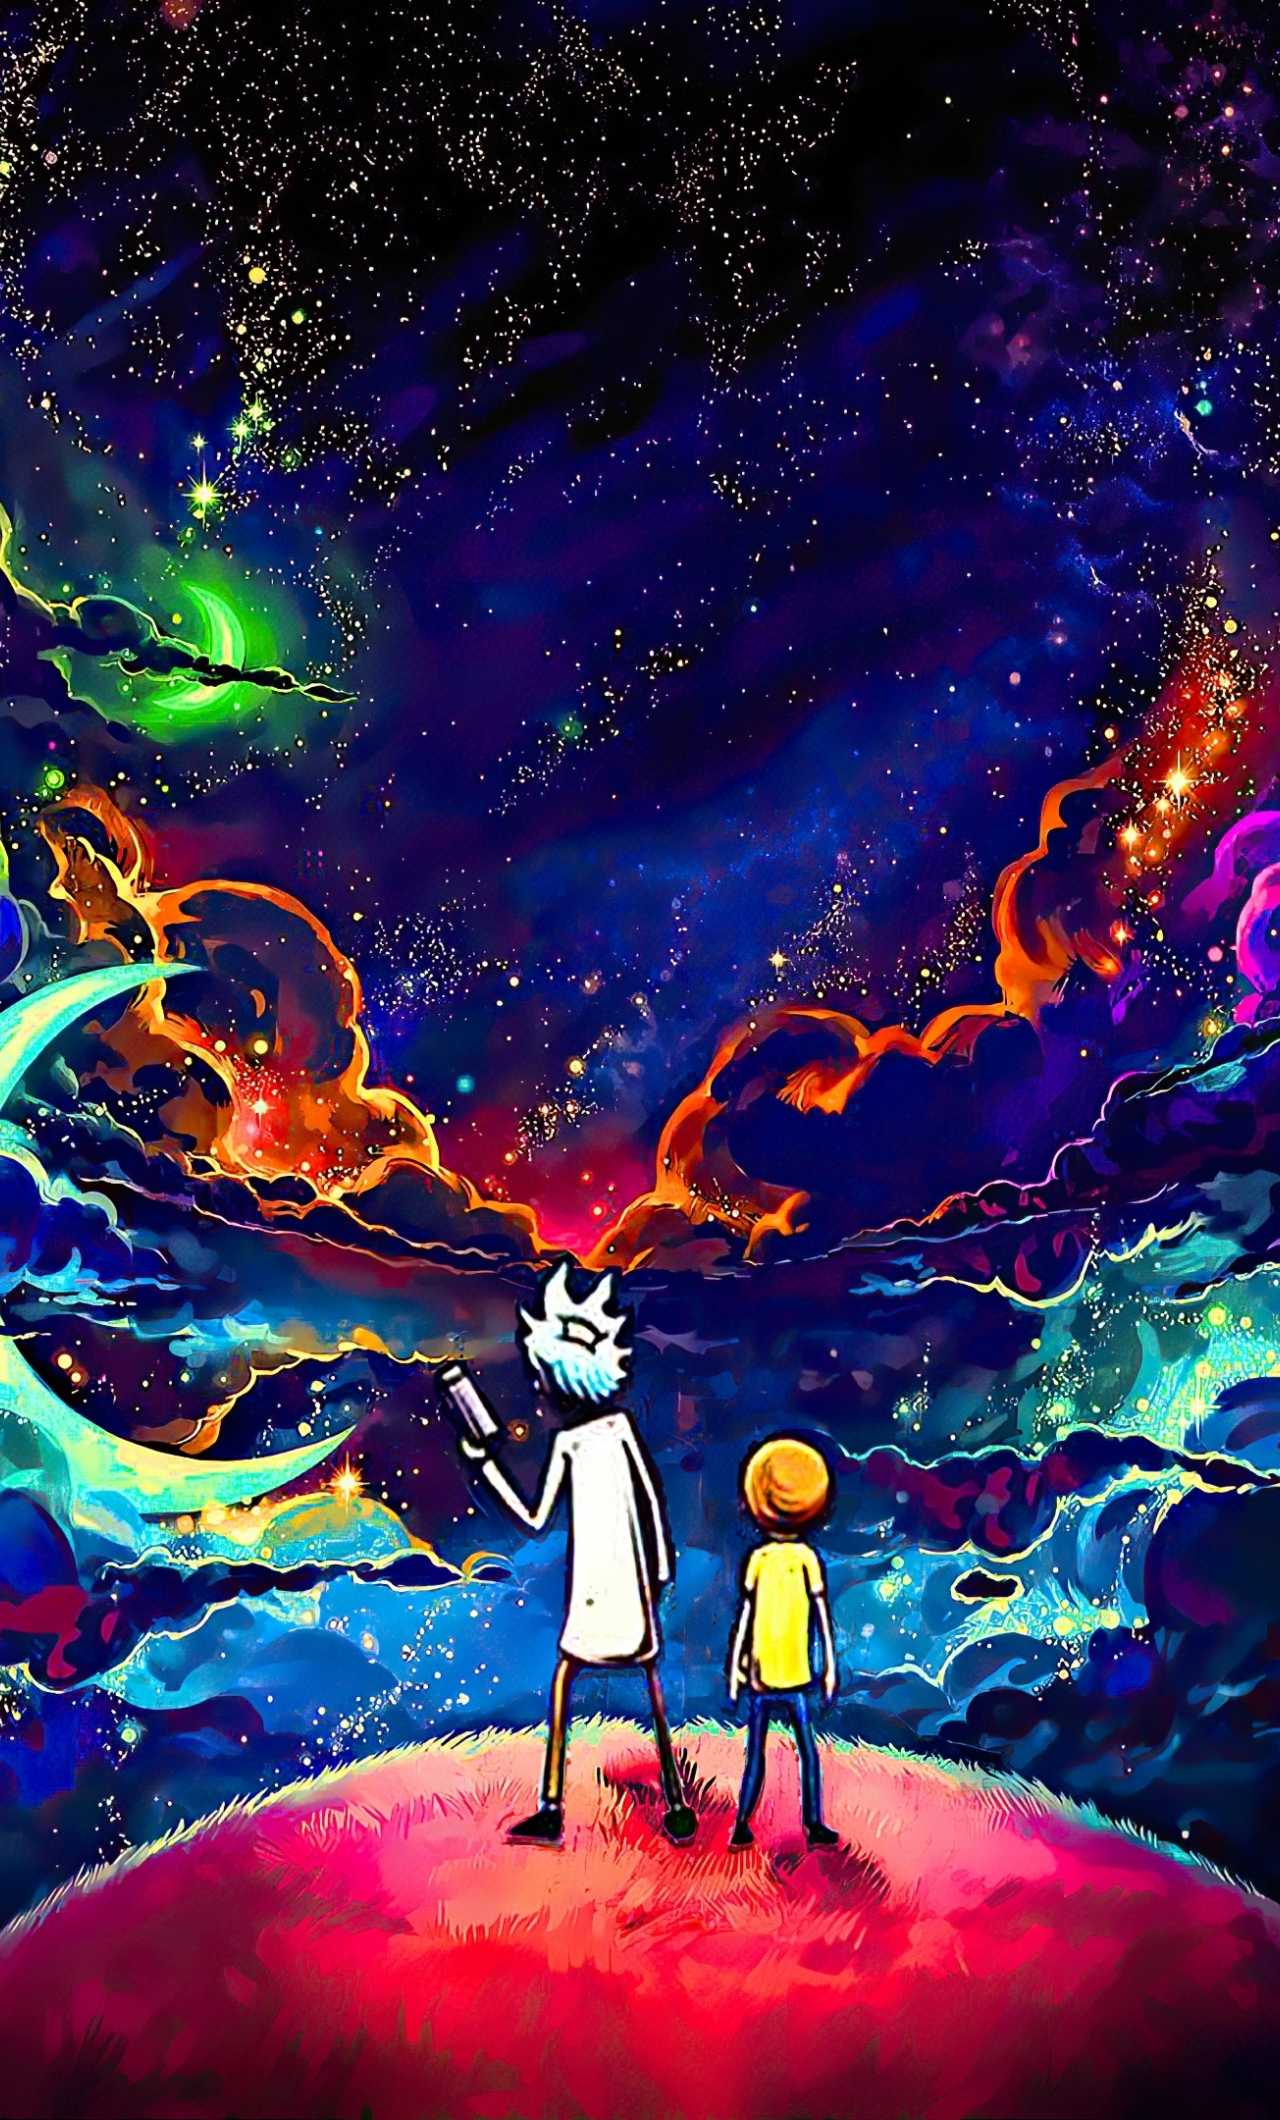 Rick And Morty Space Wallpapers